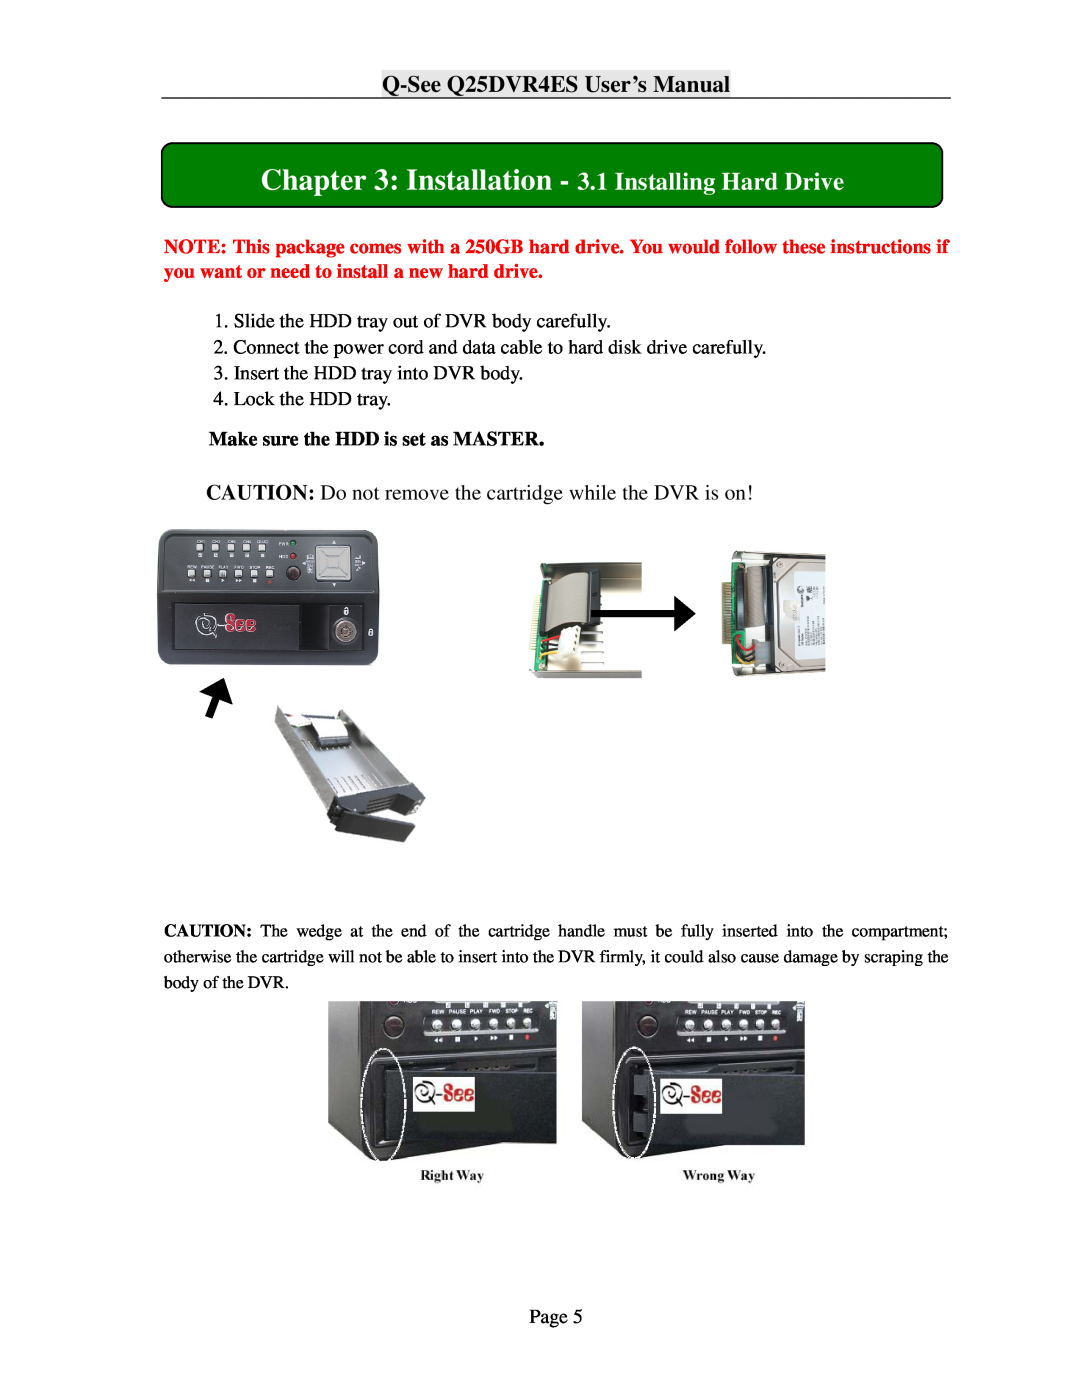 Q-See Q-SeeQ25DVR4ES User’s Manual, Slide the HDD tray out of DVR body carefully, Insert the HDD tray into DVR body 